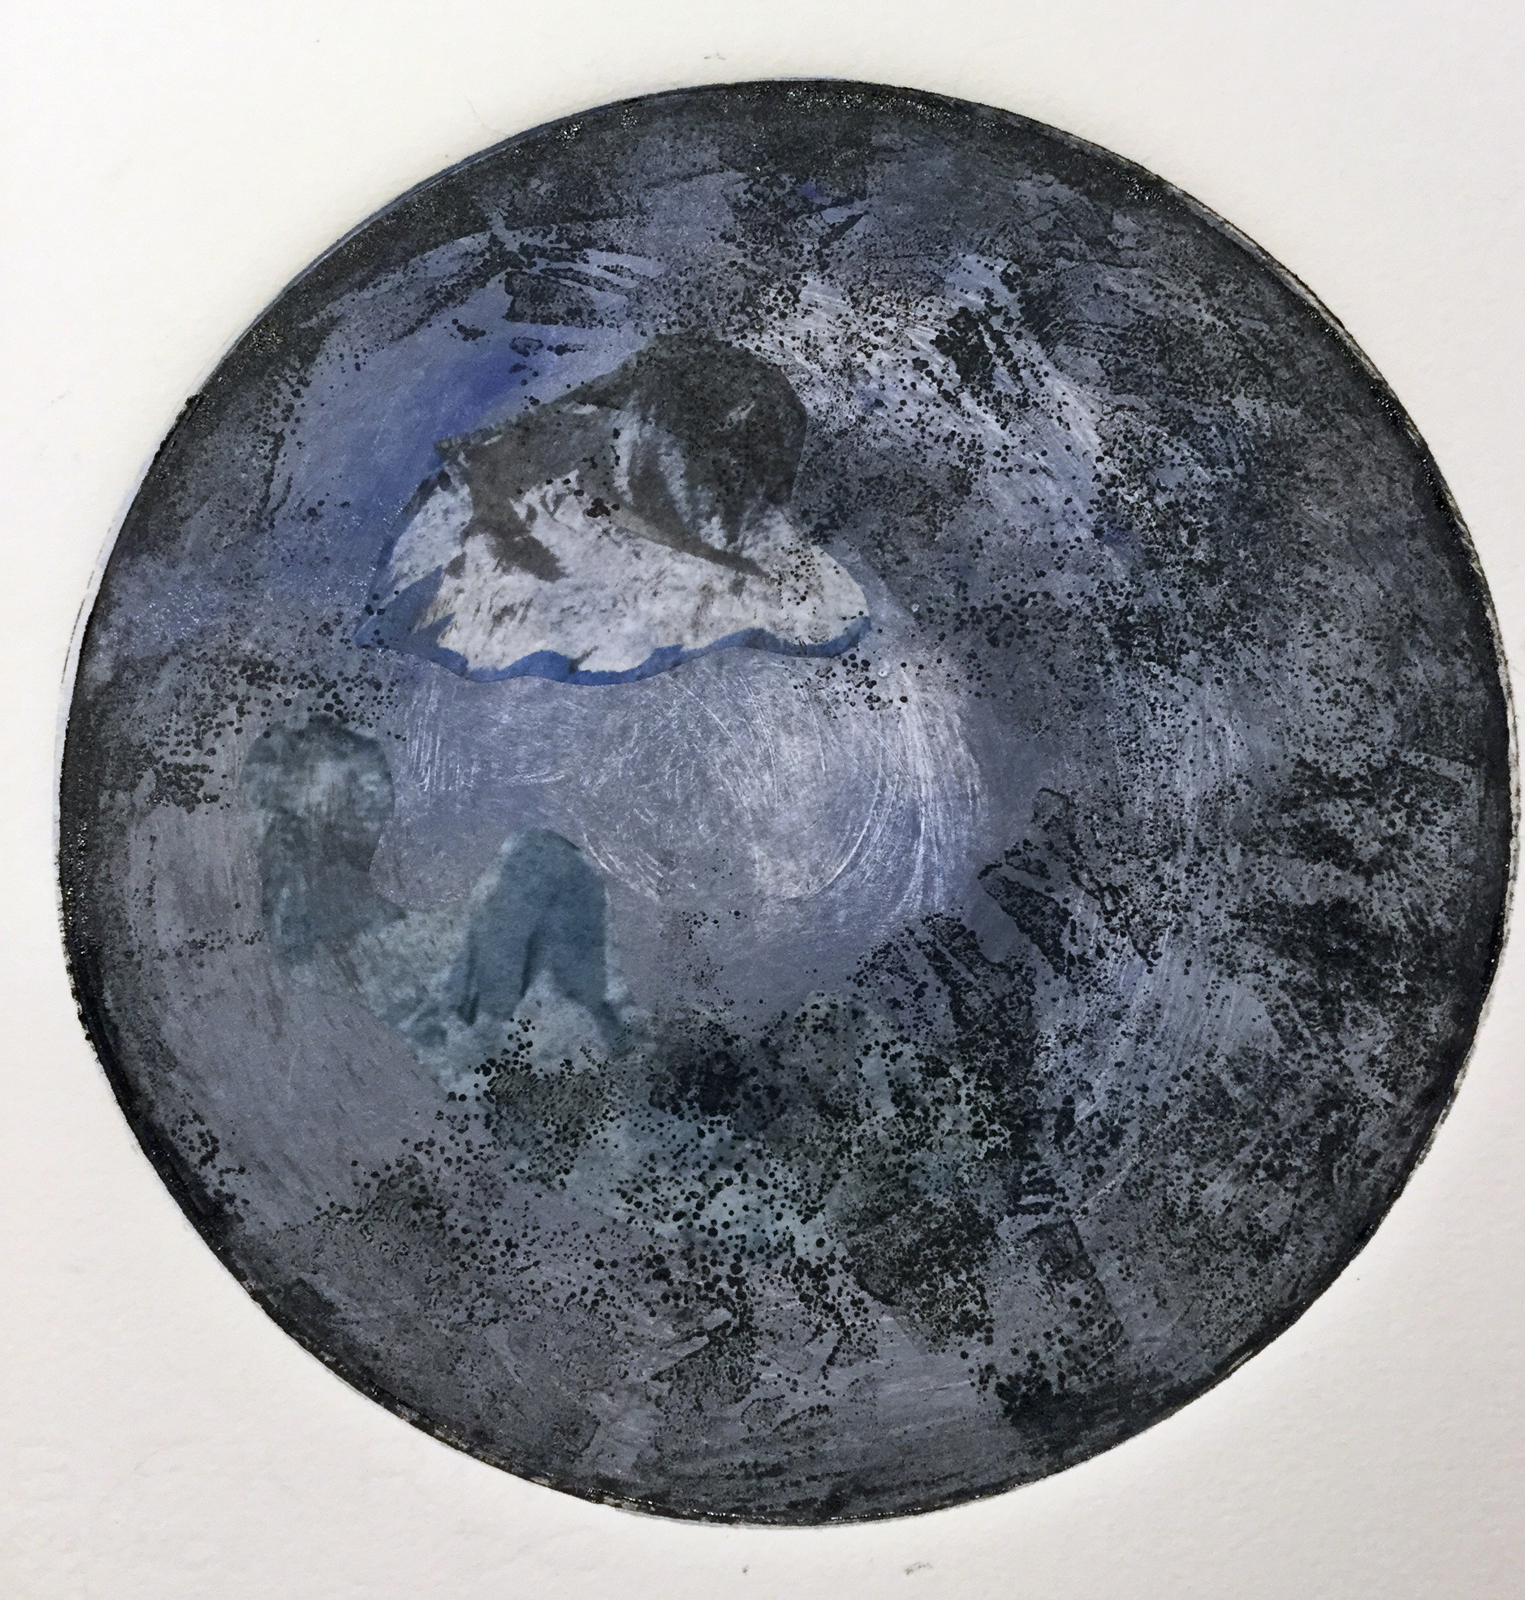  Kathline Carr,  “Arctic”   Monotype, Chine-Colle, 8 x 8 inches (round) 